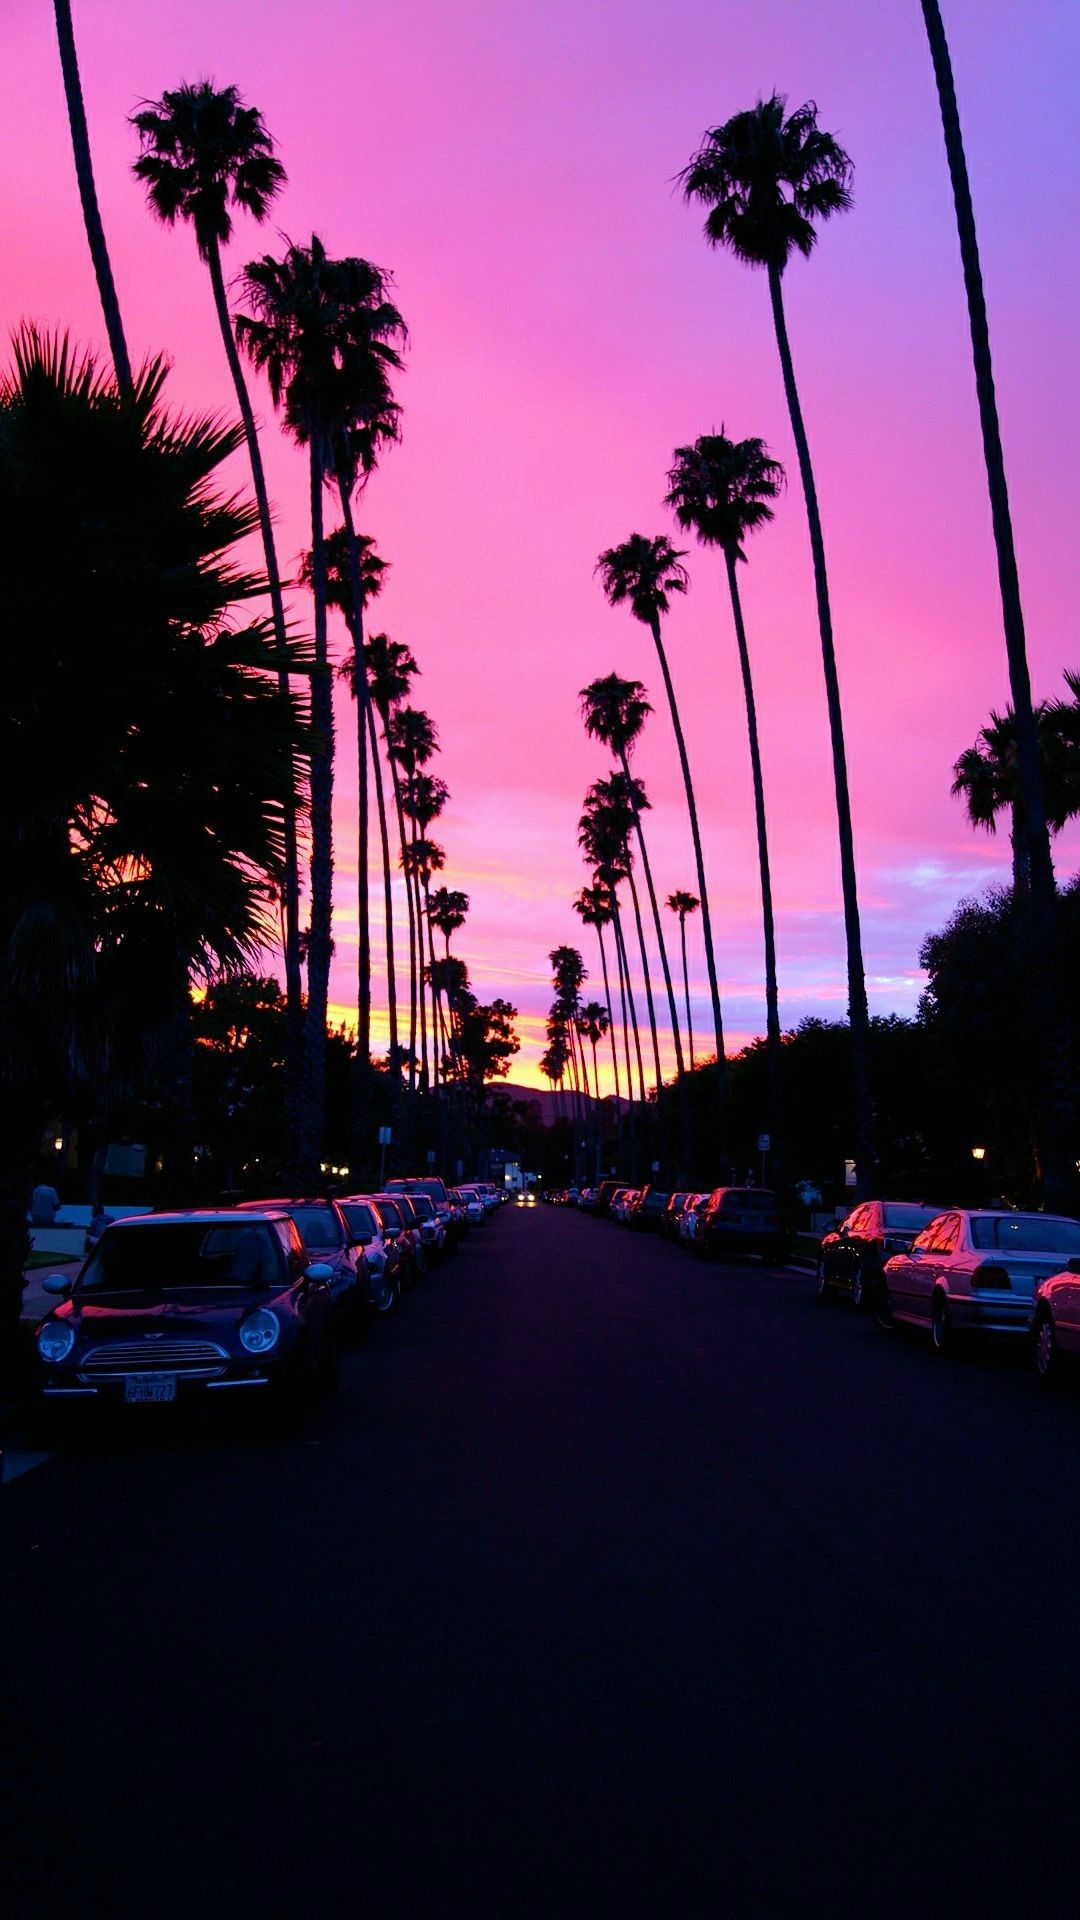 A street with palm trees and cars on it - Los Angeles